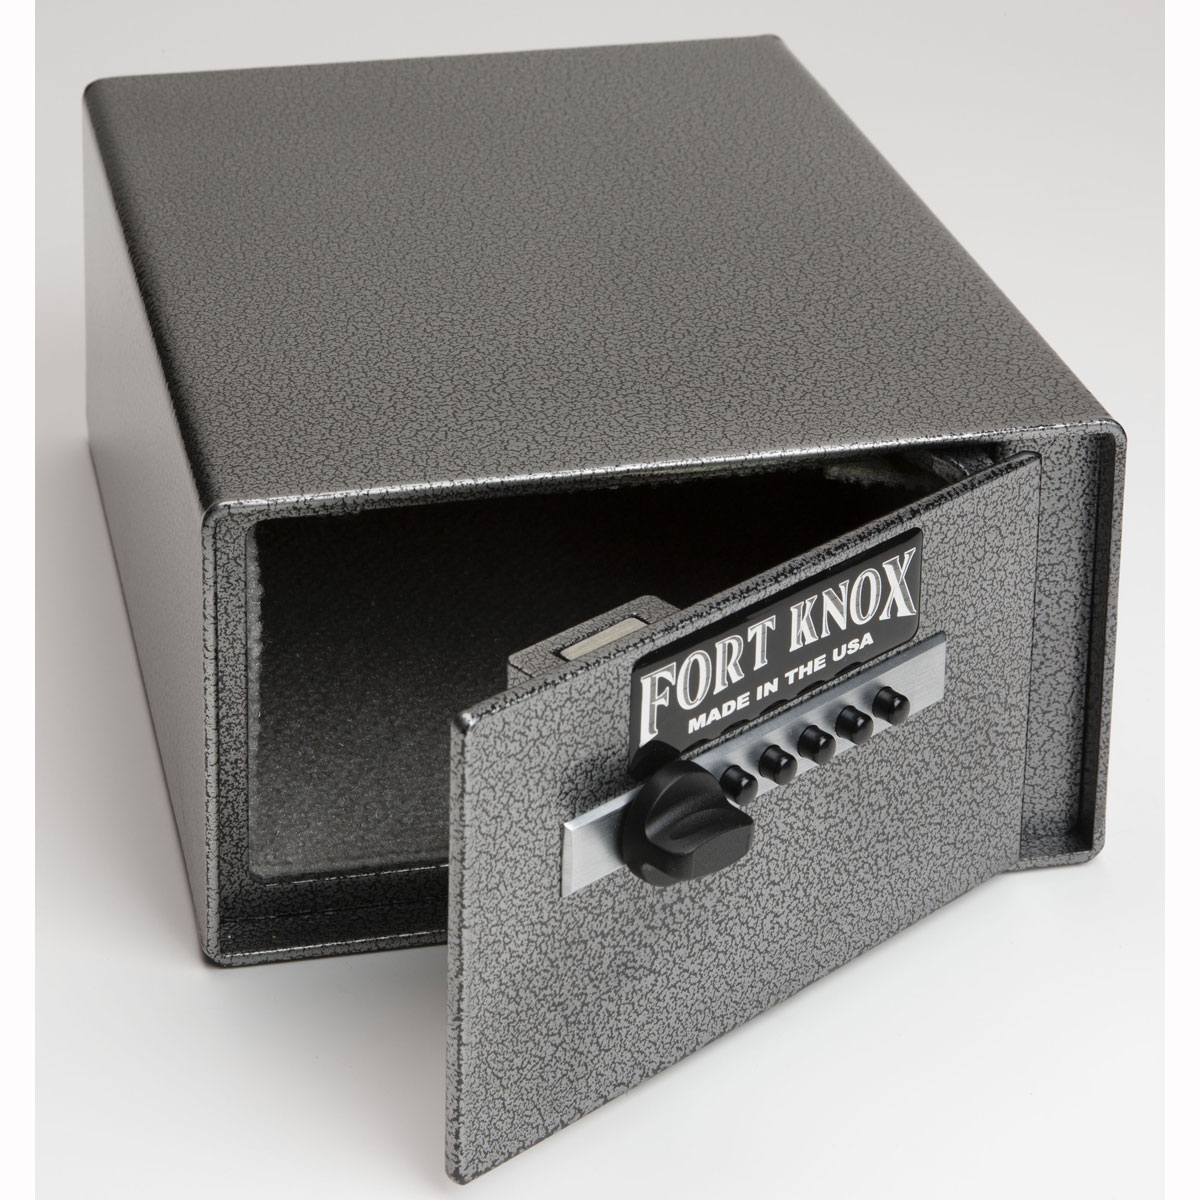 FAST Self Defence — The Safety Box®